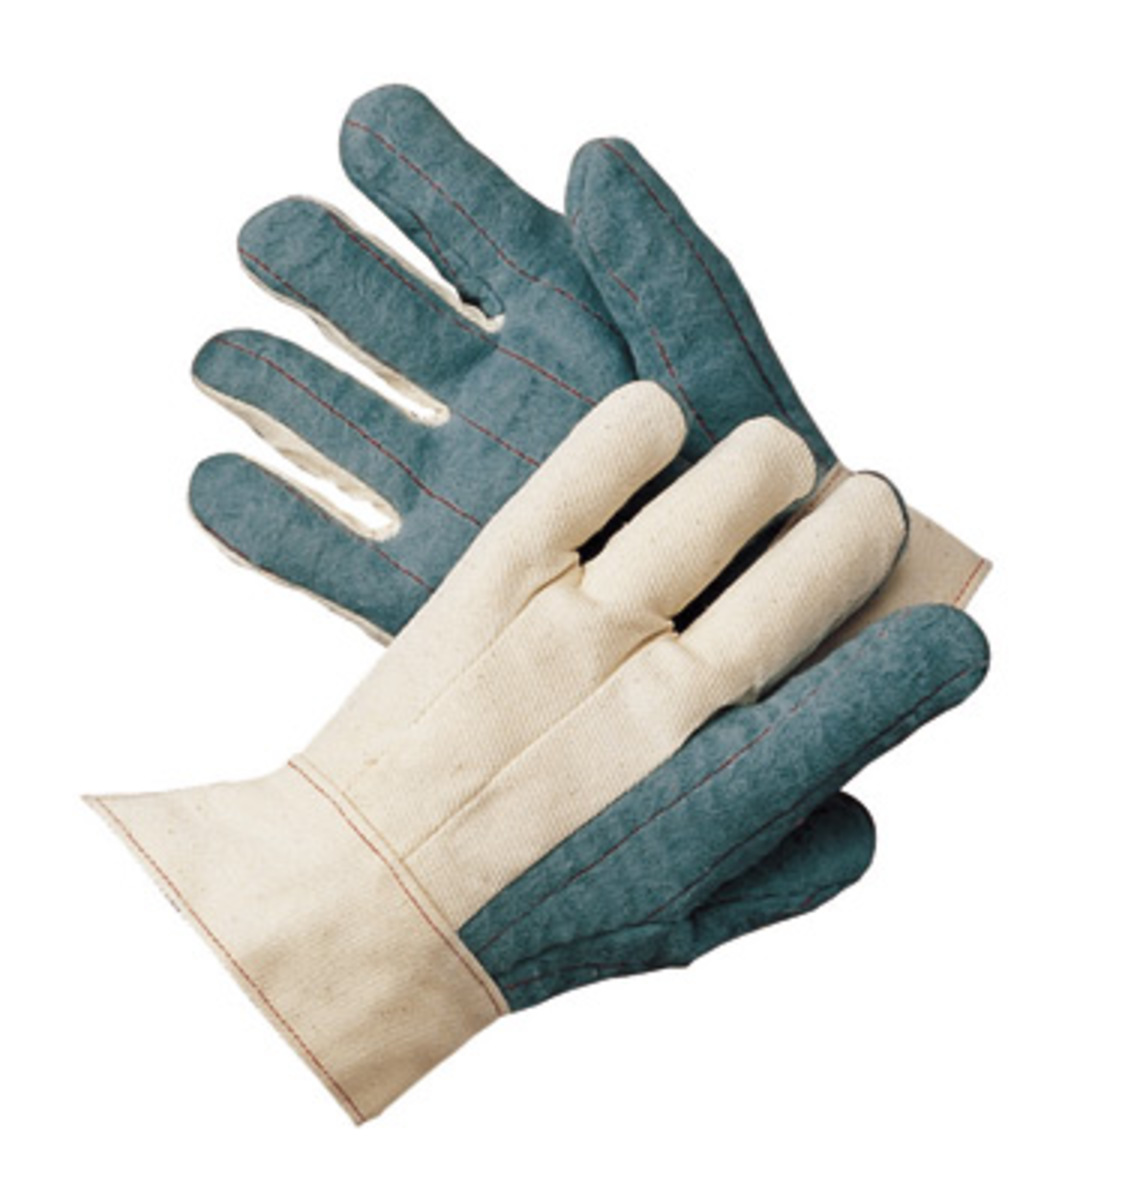 Hot Mill Gloves for Sale online at autumn supply